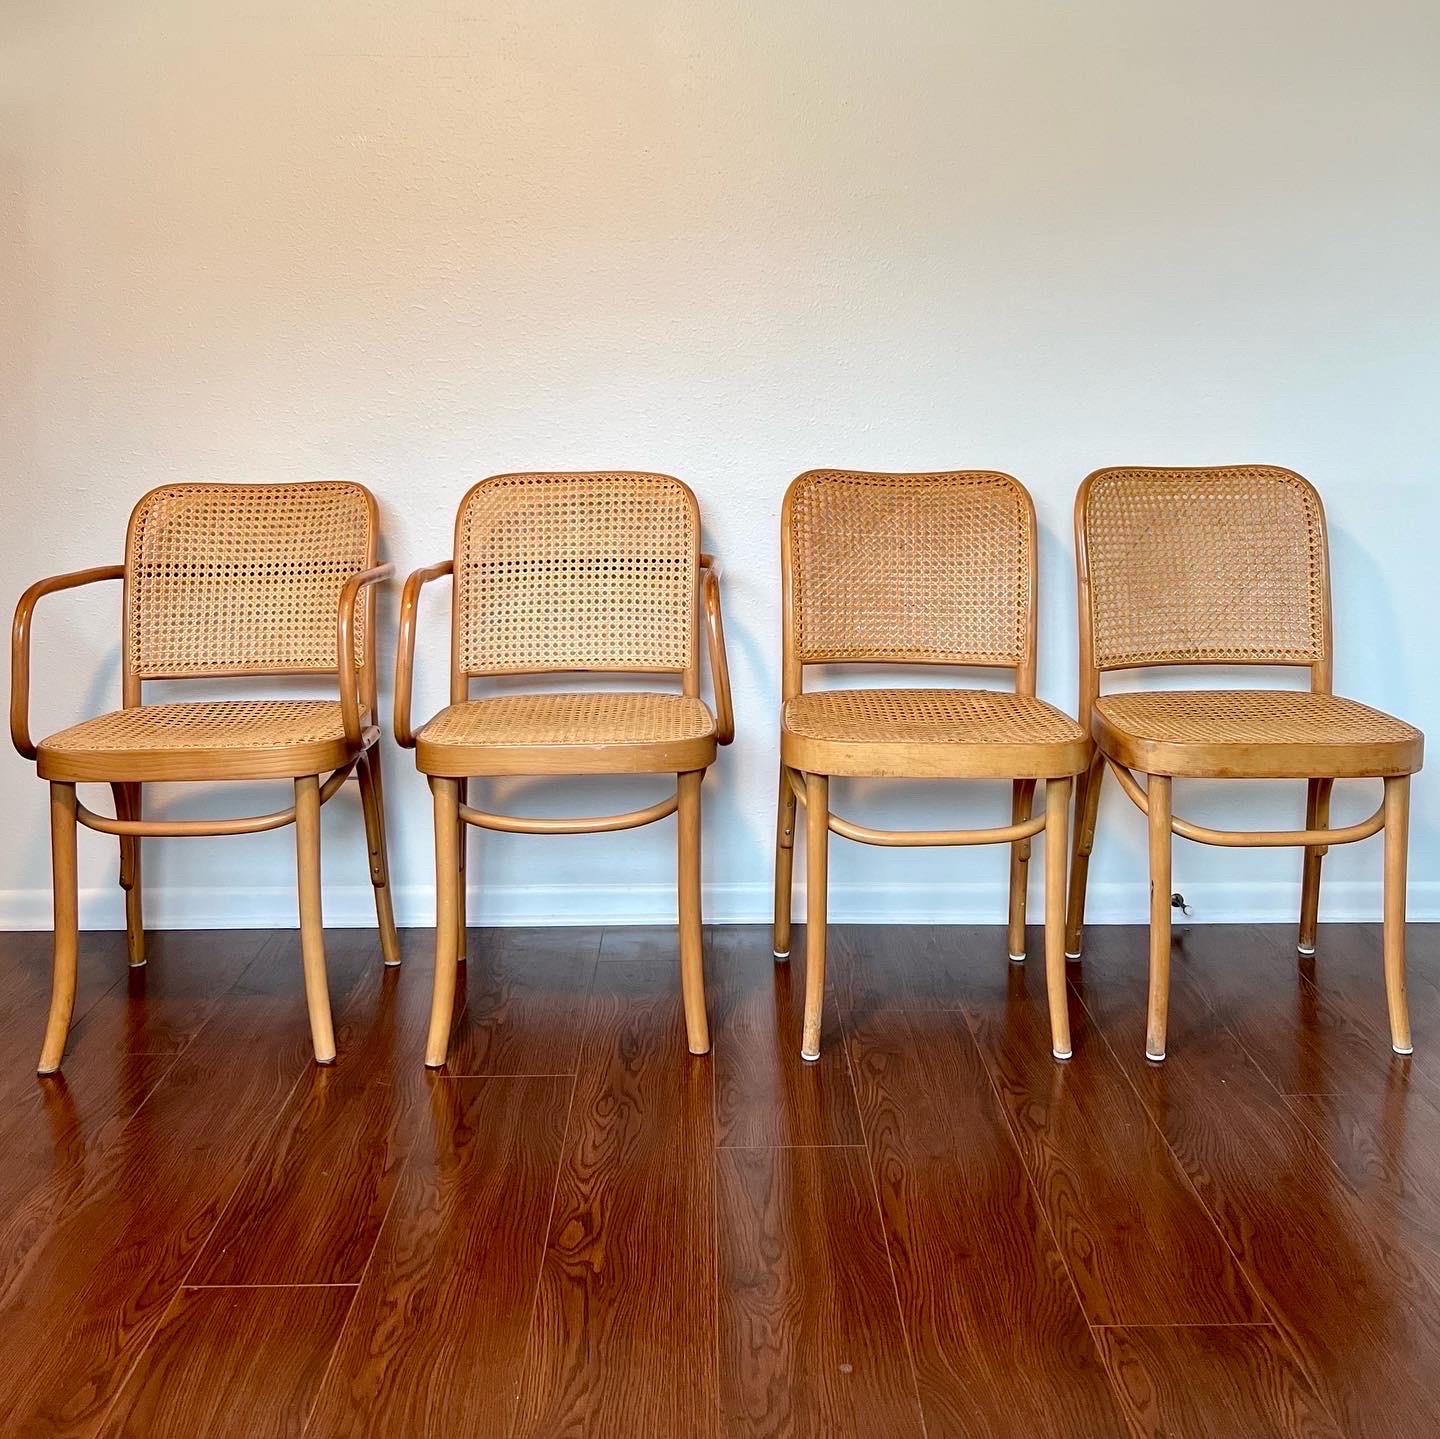 Gorgeous set of 4 Josef Hoffmann bentwood and cane chairs. Made in Poland with original FMG label. Includes 2 side chairs & 2 armchairs. Very good original condition with some flaws consistent with age. Please see photos. 

Dimensions:
32